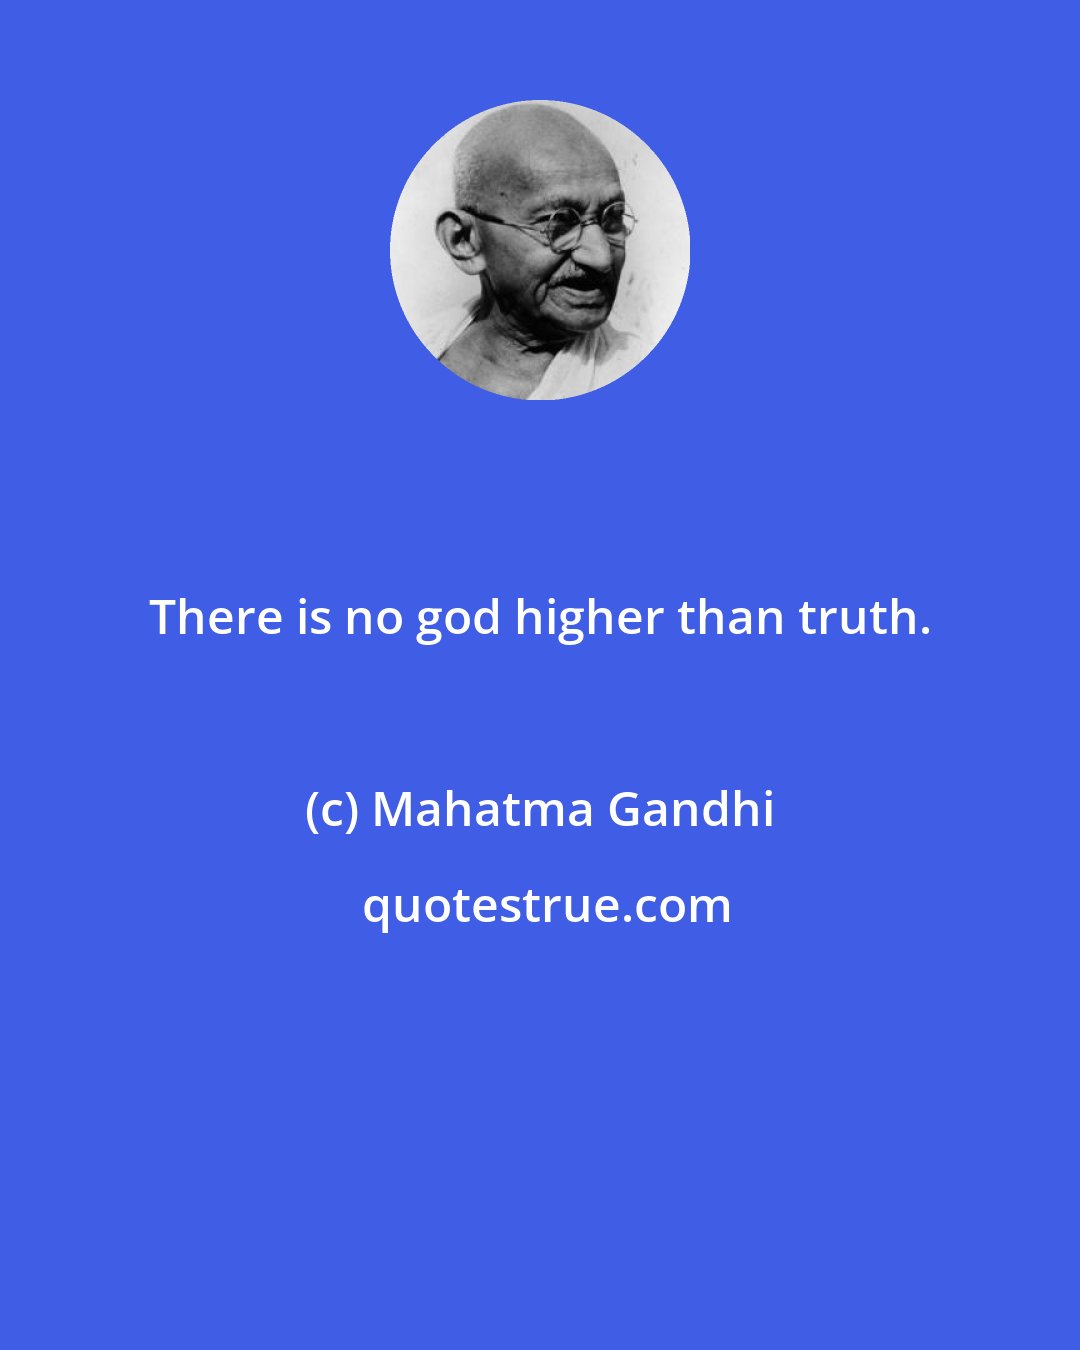 Mahatma Gandhi: There is no god higher than truth.